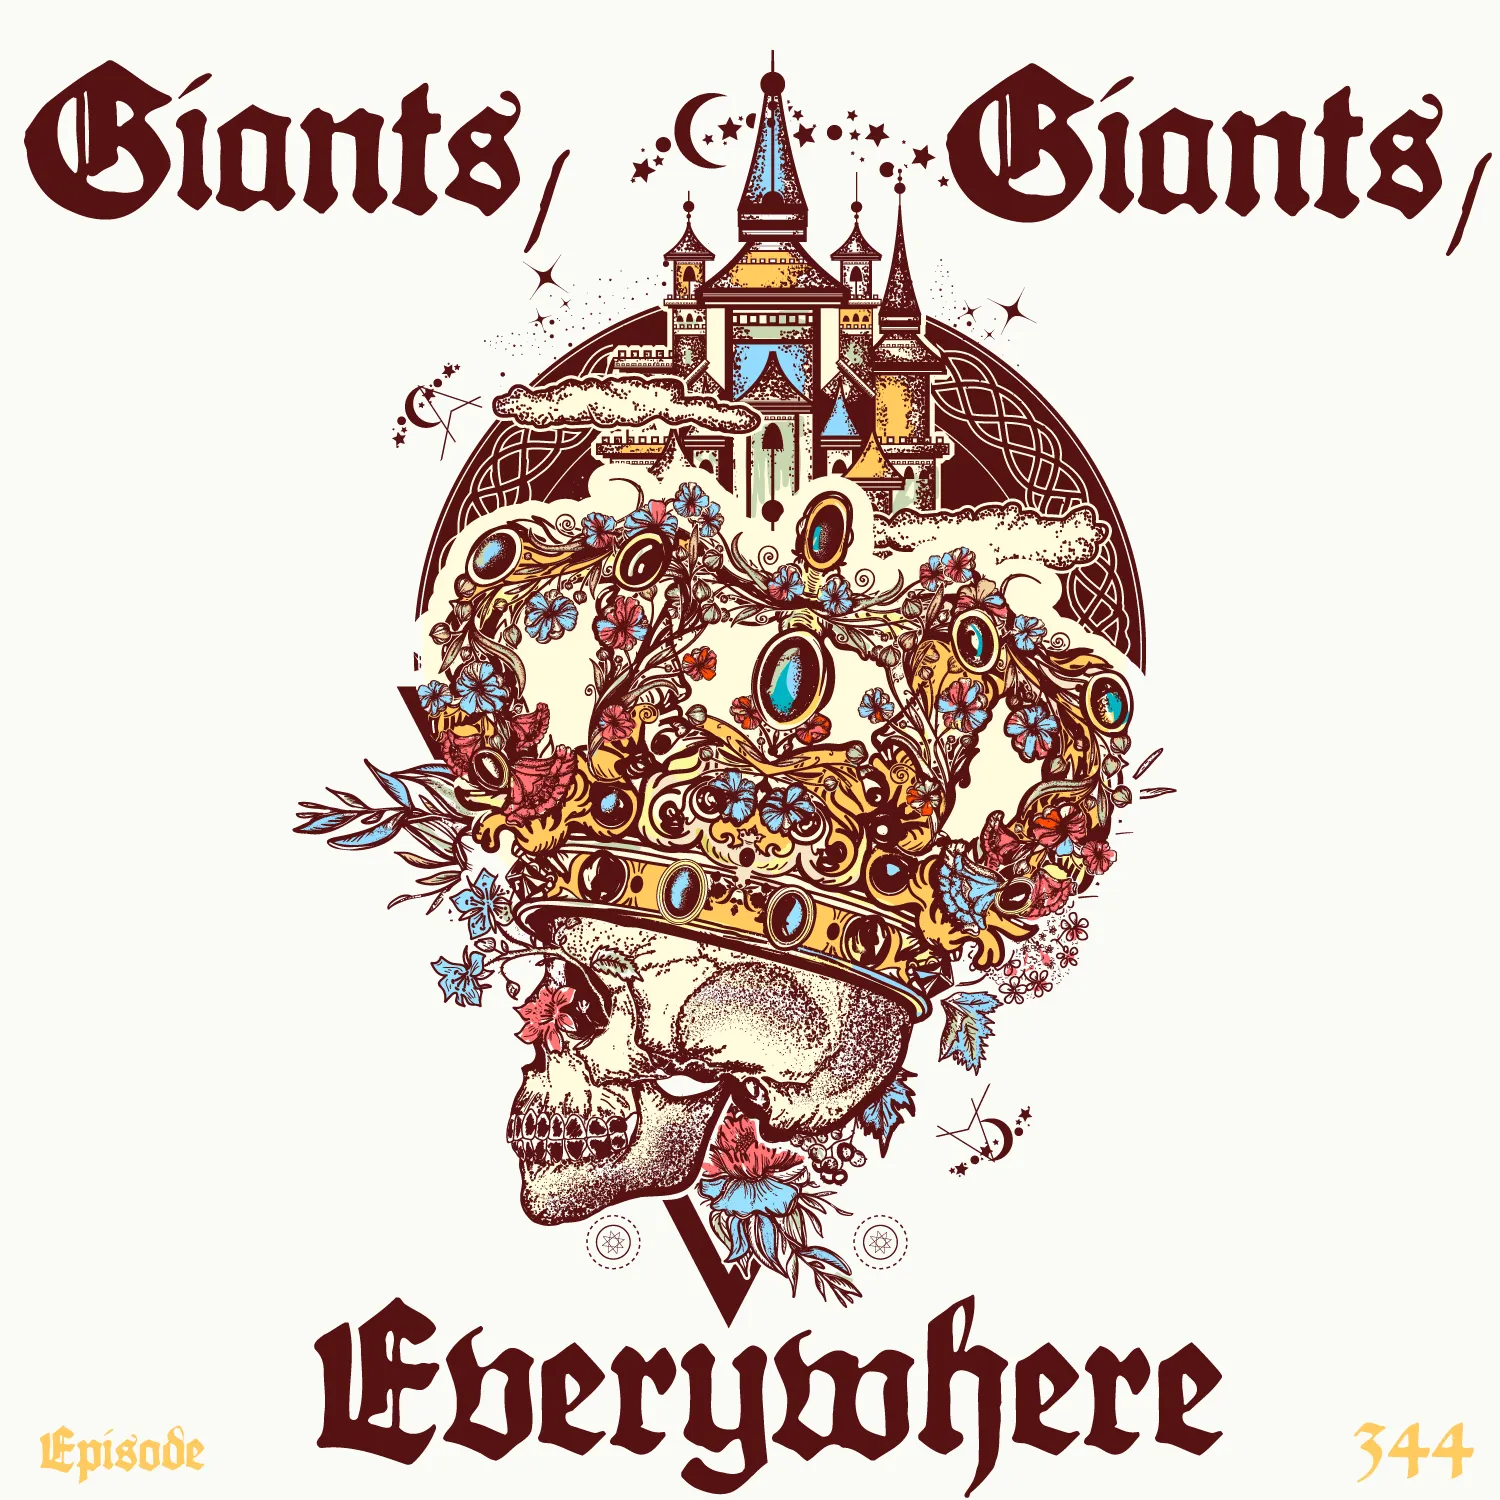 An illustrated image featuring a gothic theme with the words "Giants, Giants, Everywhere" prominently displayed in a decorative font. At the center, a large, ornate crown adorned with jewels and intricate floral designs rests atop a skull. Behind the skull, a stylized castle with pointed towers rises, set against a backdrop that suggests a full moon or a planet. It has "episode 344" at the bottom in the same font but in yellow.